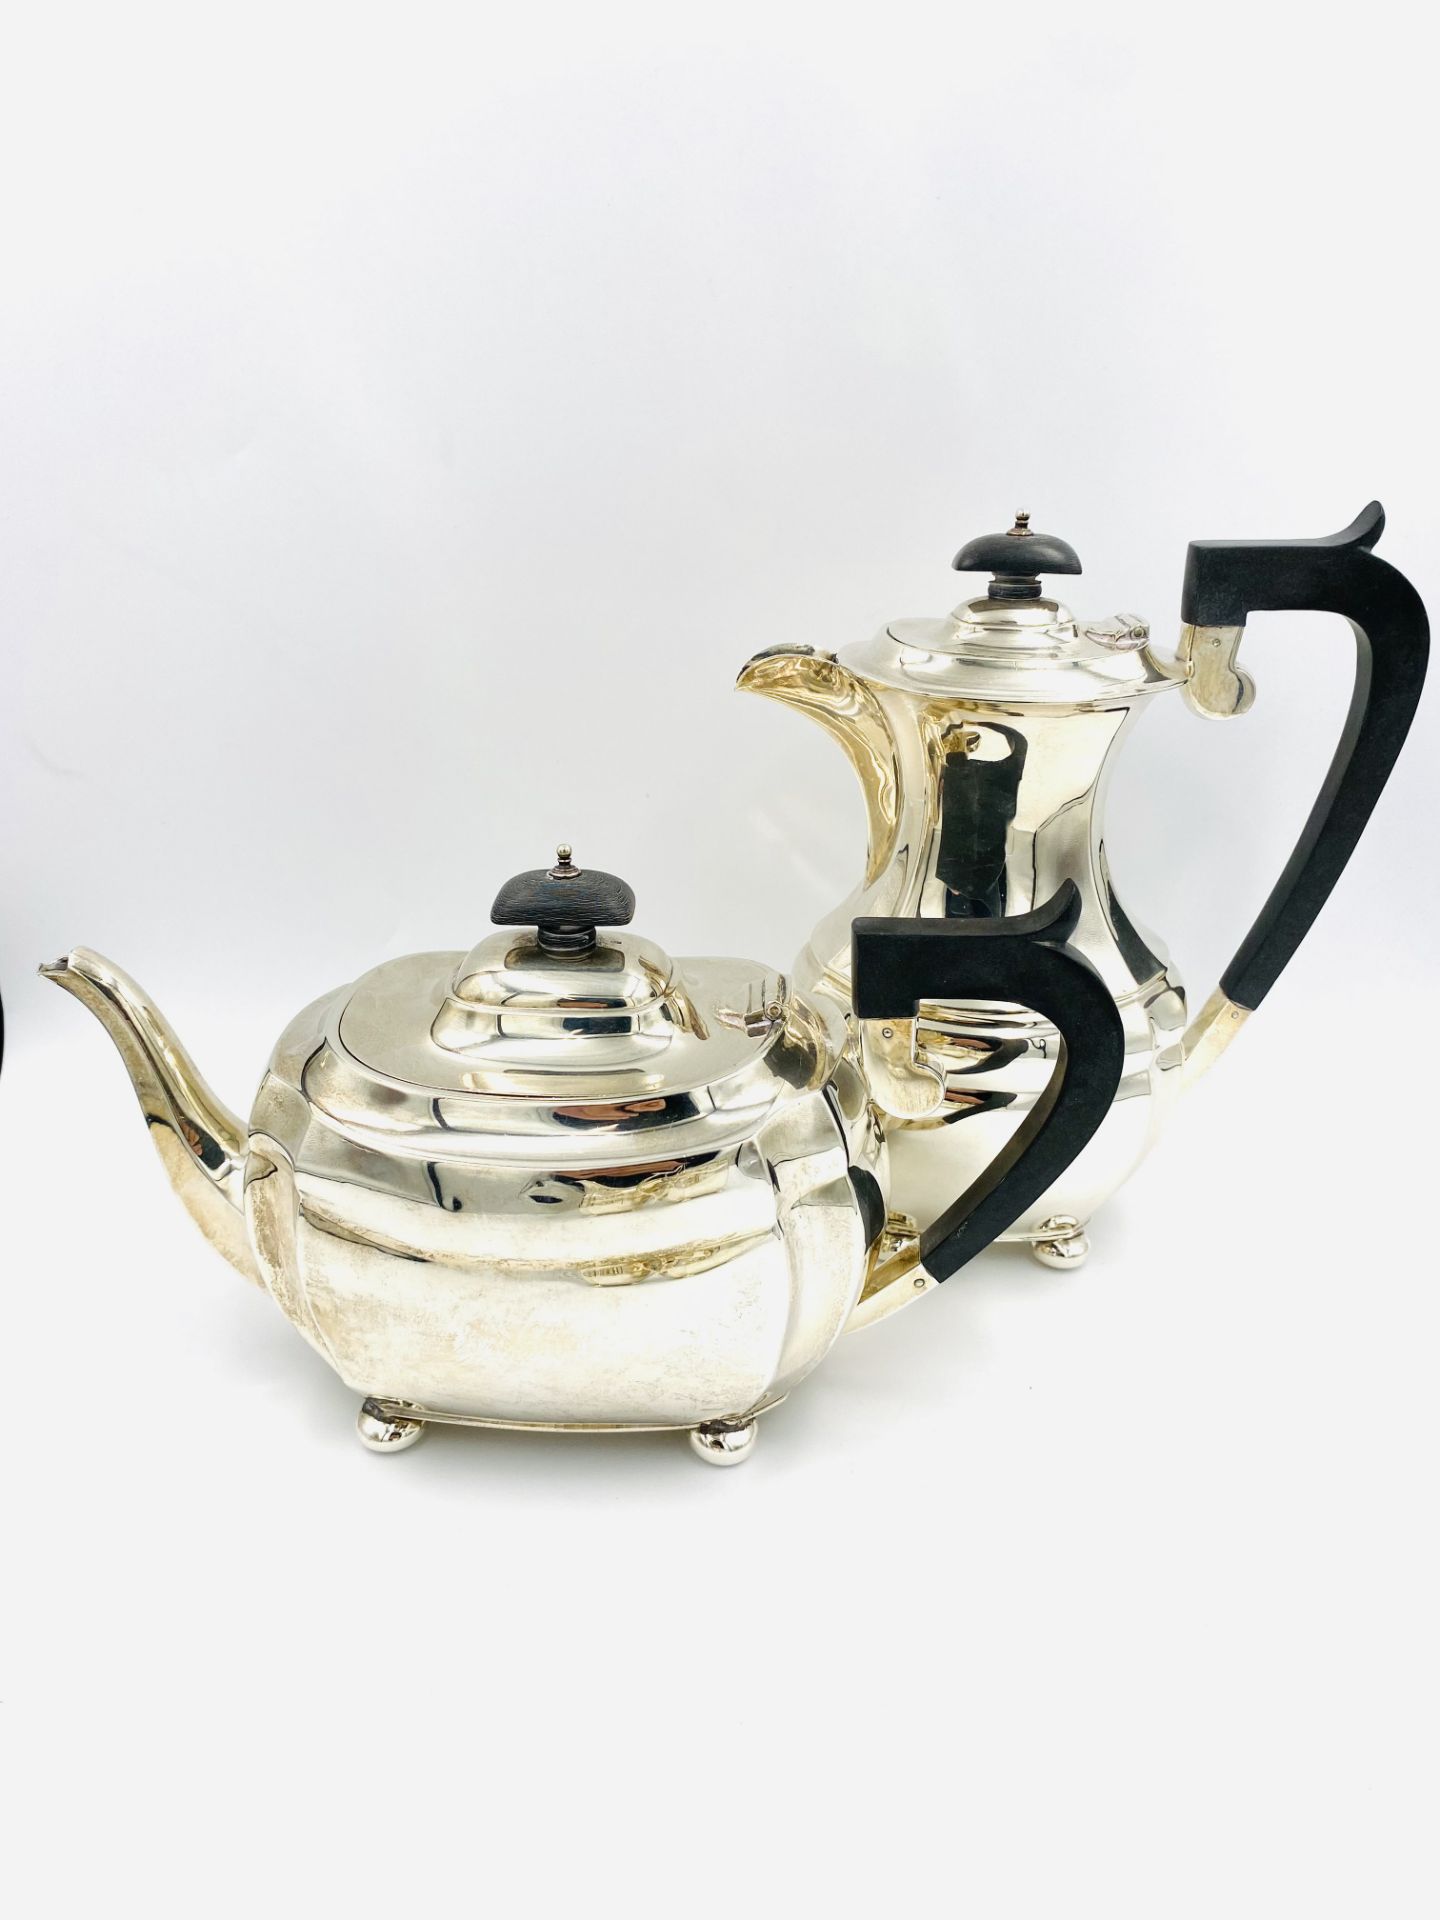 Silver tea and coffee set, Chester 1930 - Image 3 of 5